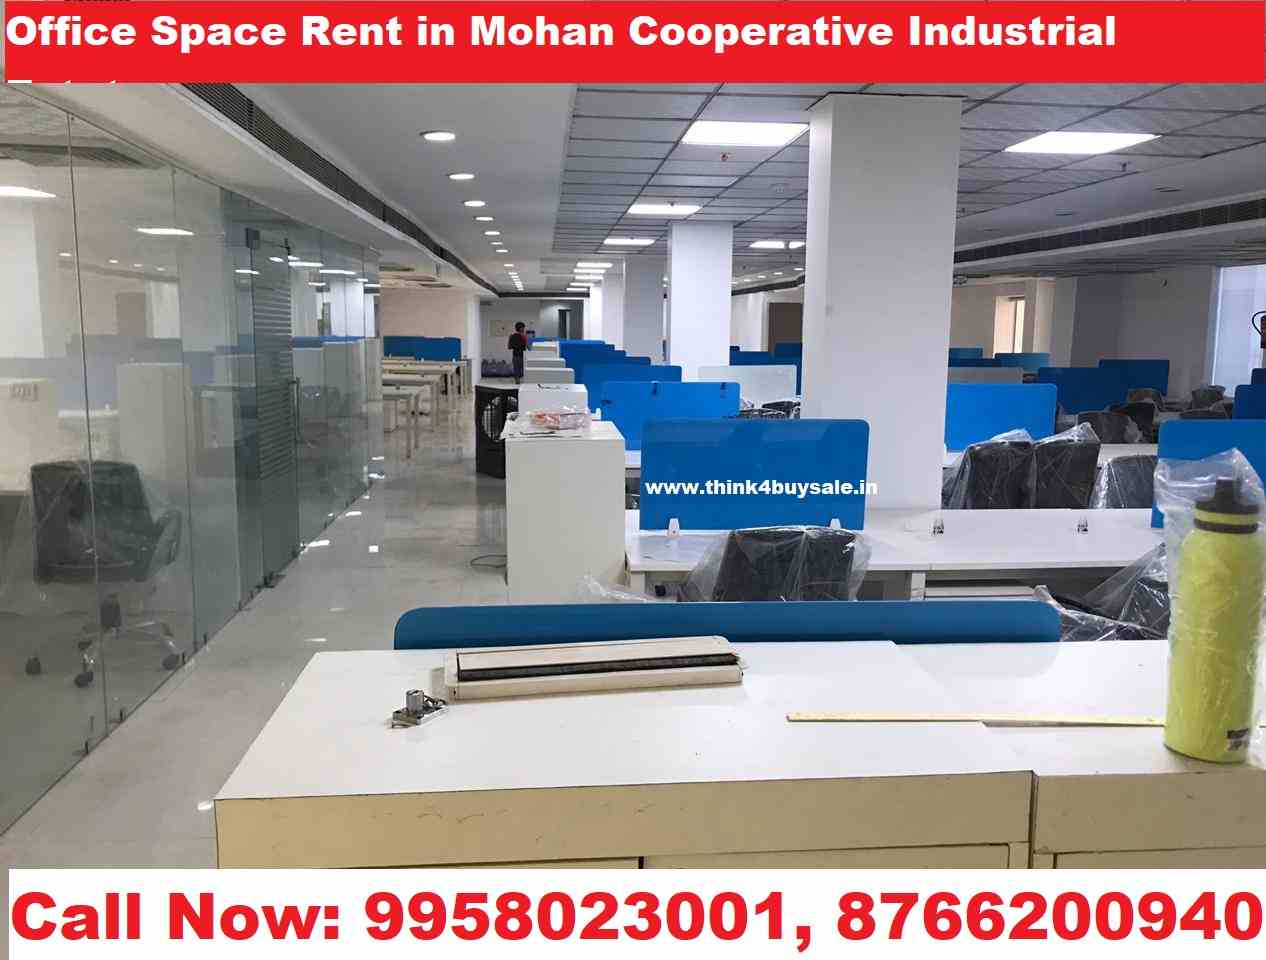 Office Space Rent in Mohan Cooperative Industrial Estate